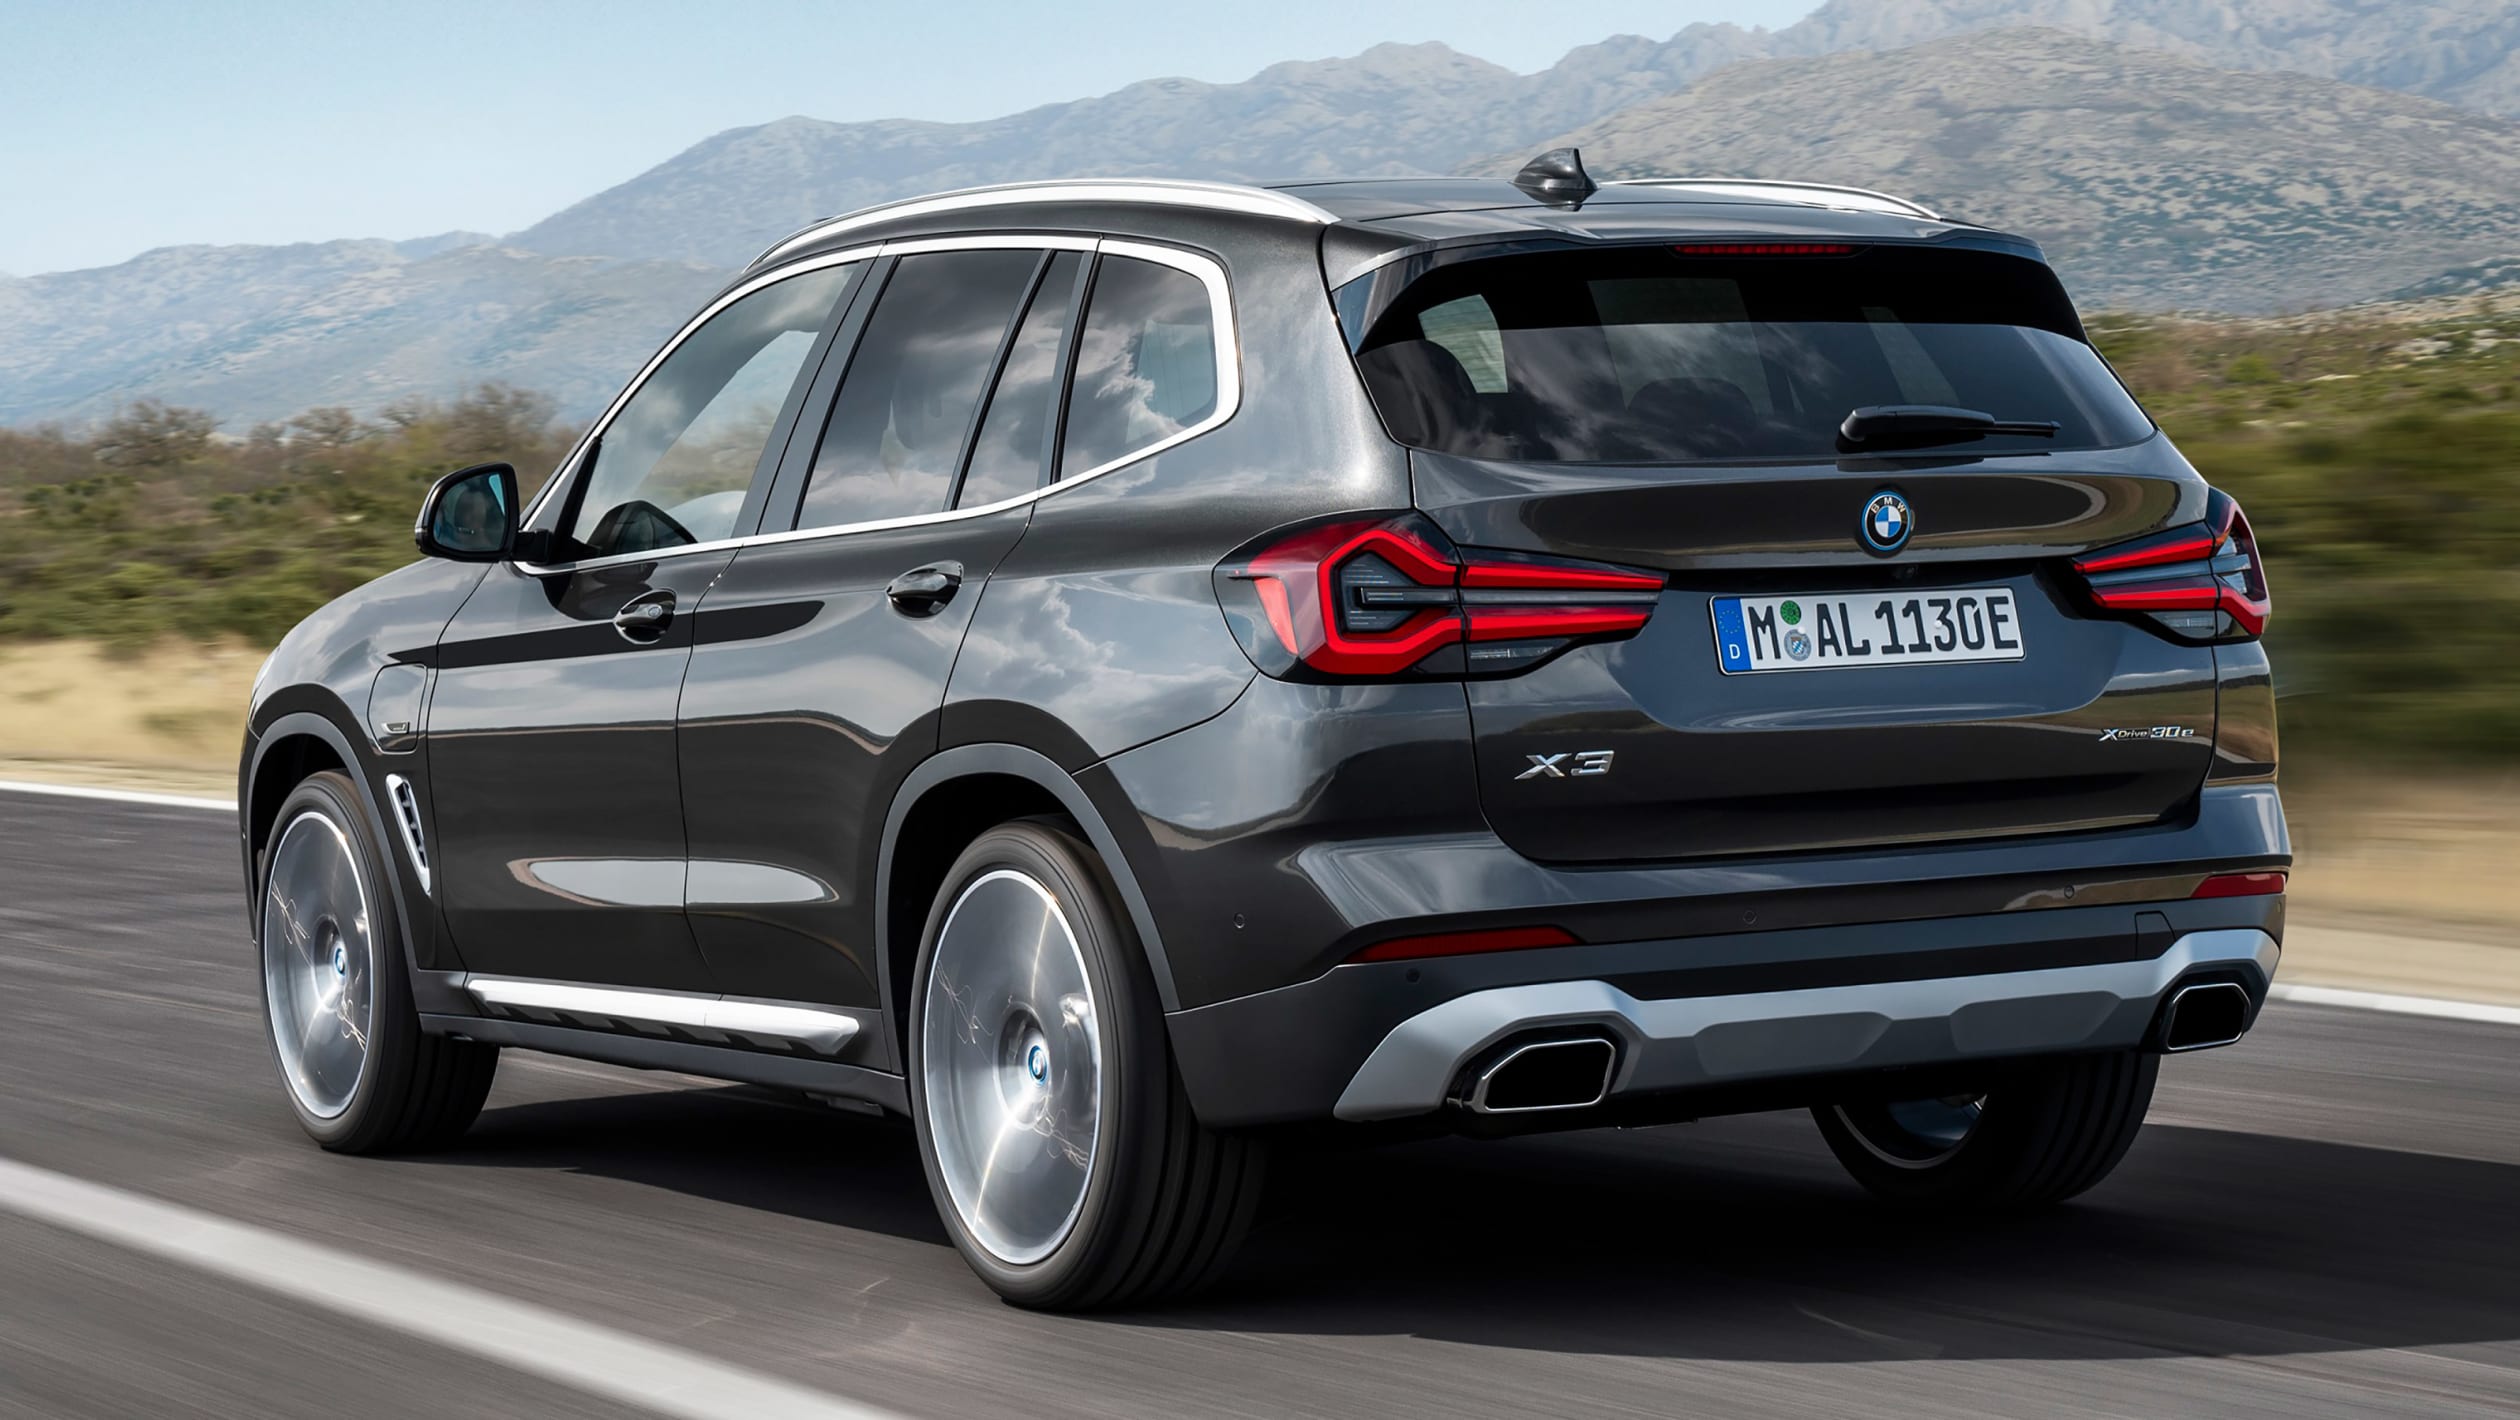 2022 BMW X3 facelift adds new look and equipment - Automotive Daily